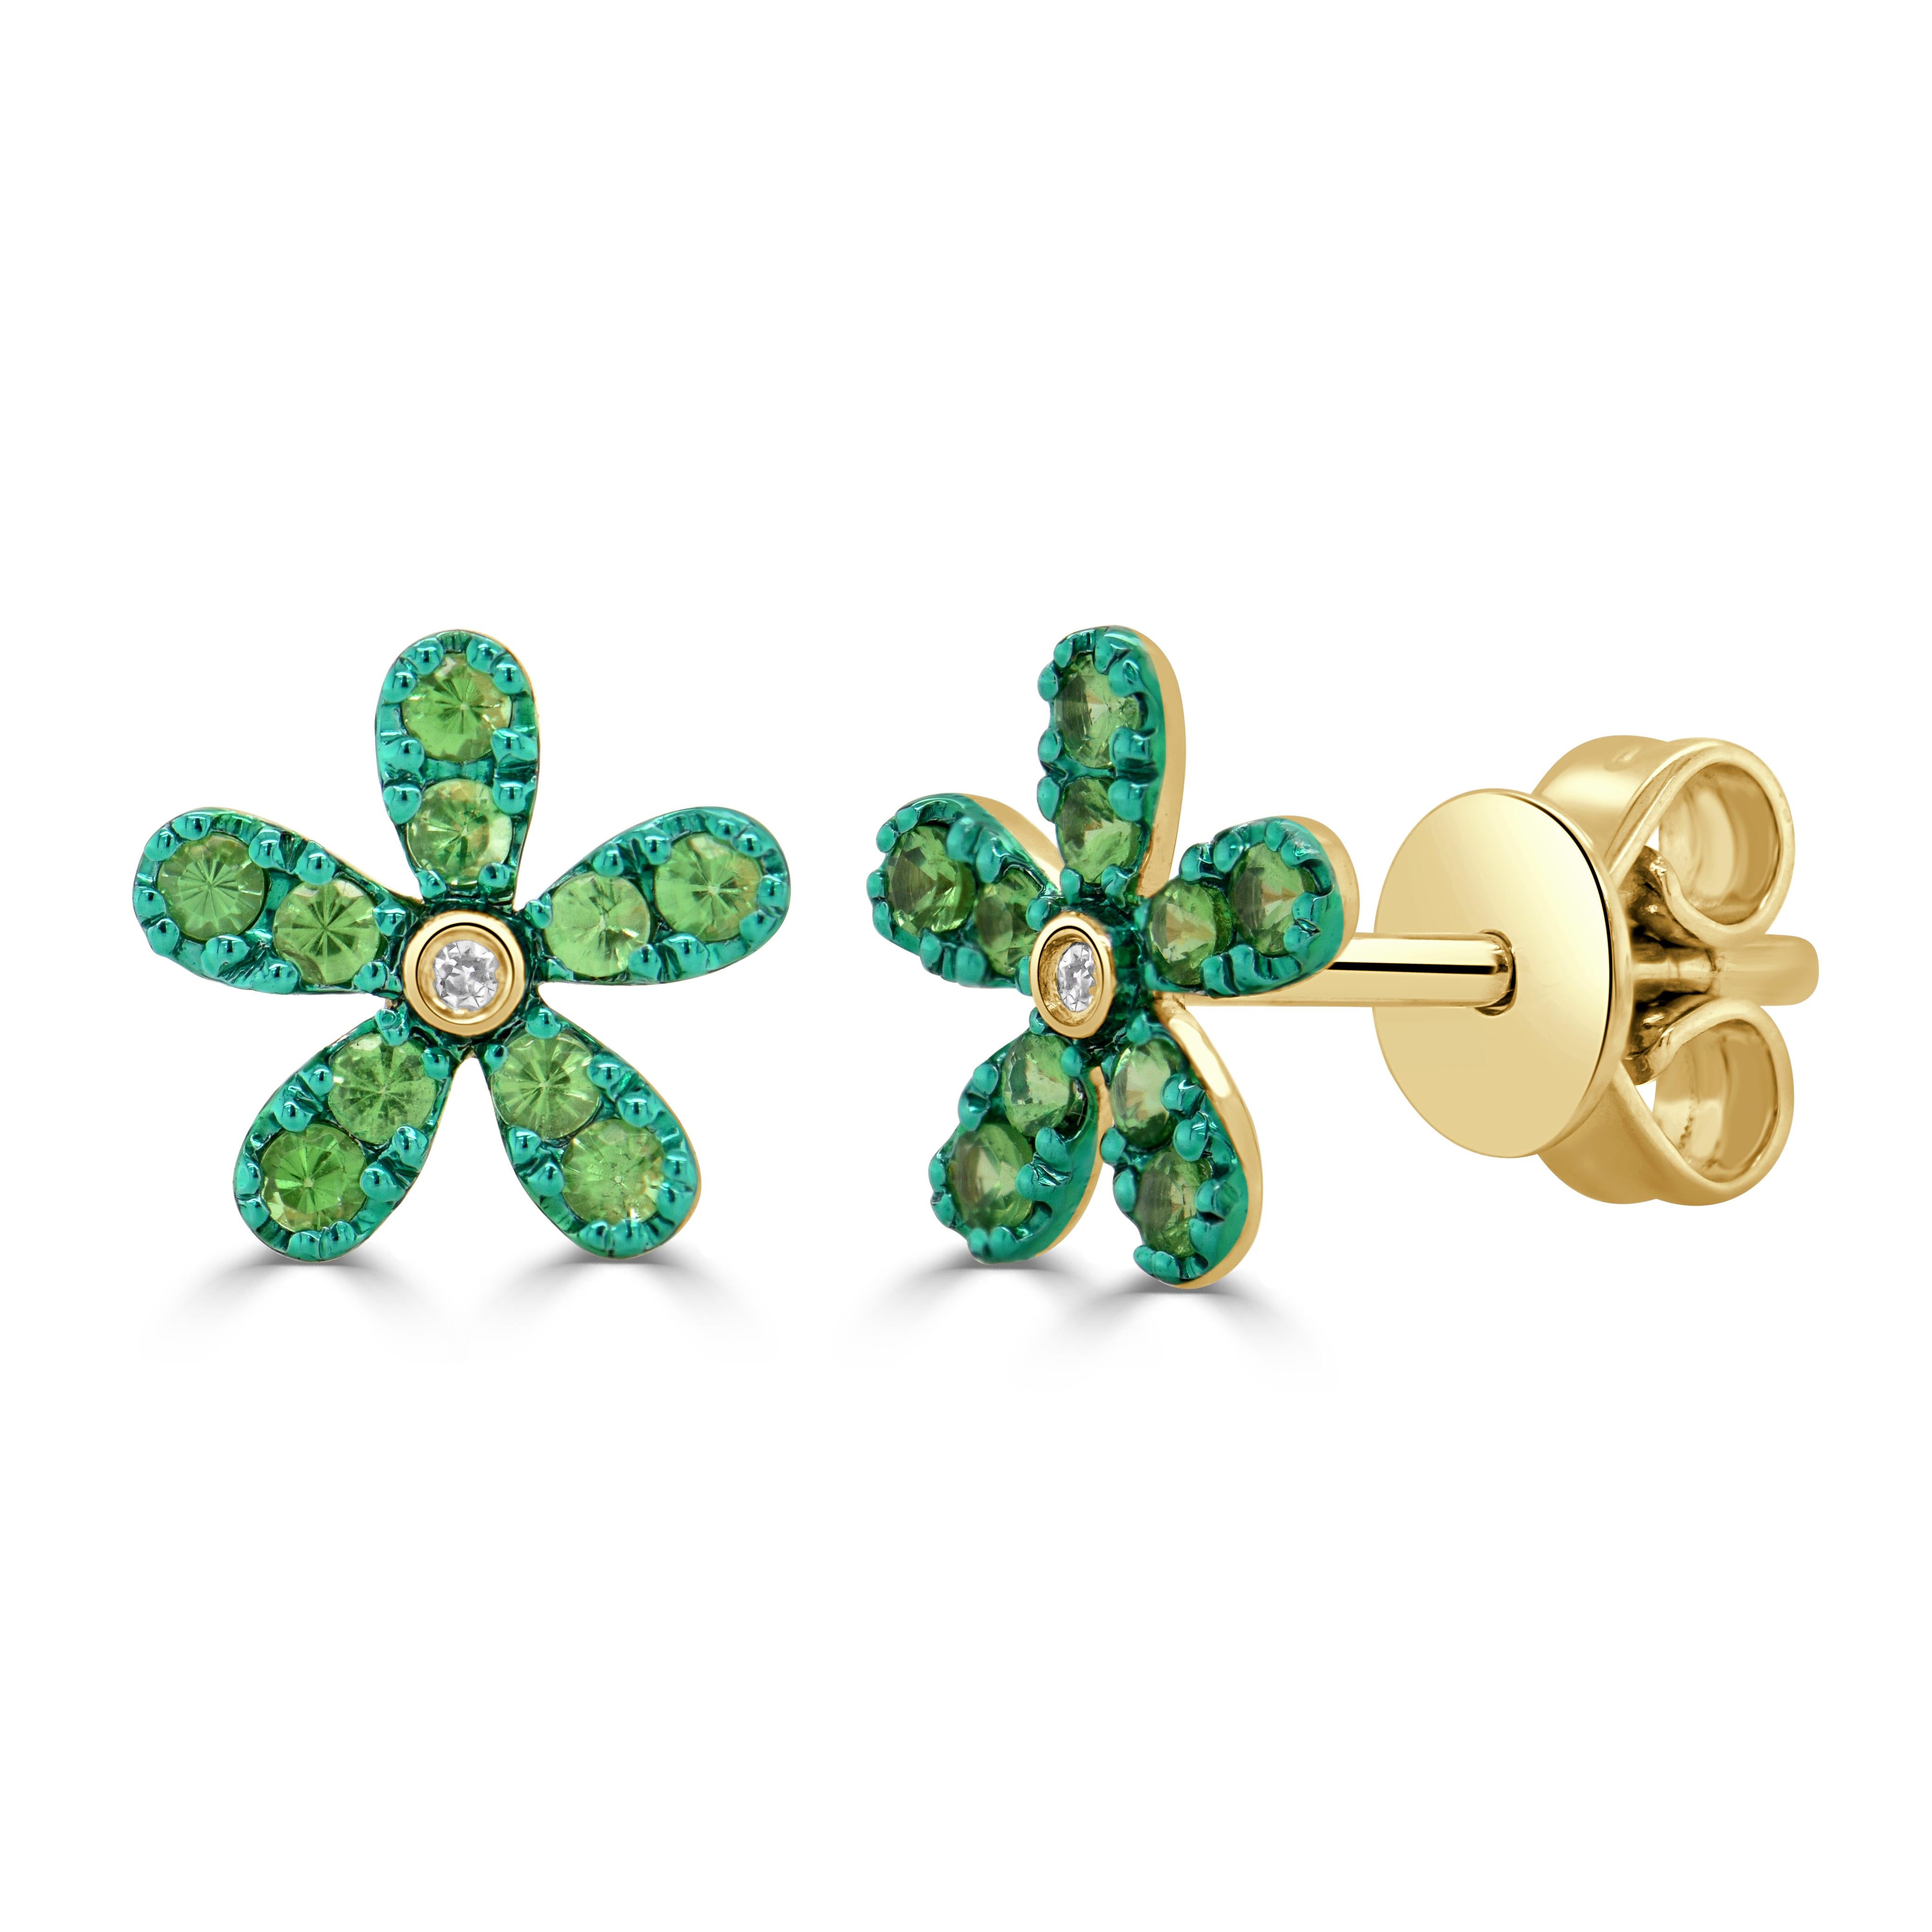 14K GOLD TSAVORITE & DIAMOND FLOWER STUD EARRINGS

-Diamond Weight: 0.1 ct.
-Tsavorite Weight: 0.26 ct.
-Gold Weight: 1.13 grams (approx.)
-Size: 8MM

This piece is perfect for everyday wear and makes the perfect Gift! 

We certify that this is an